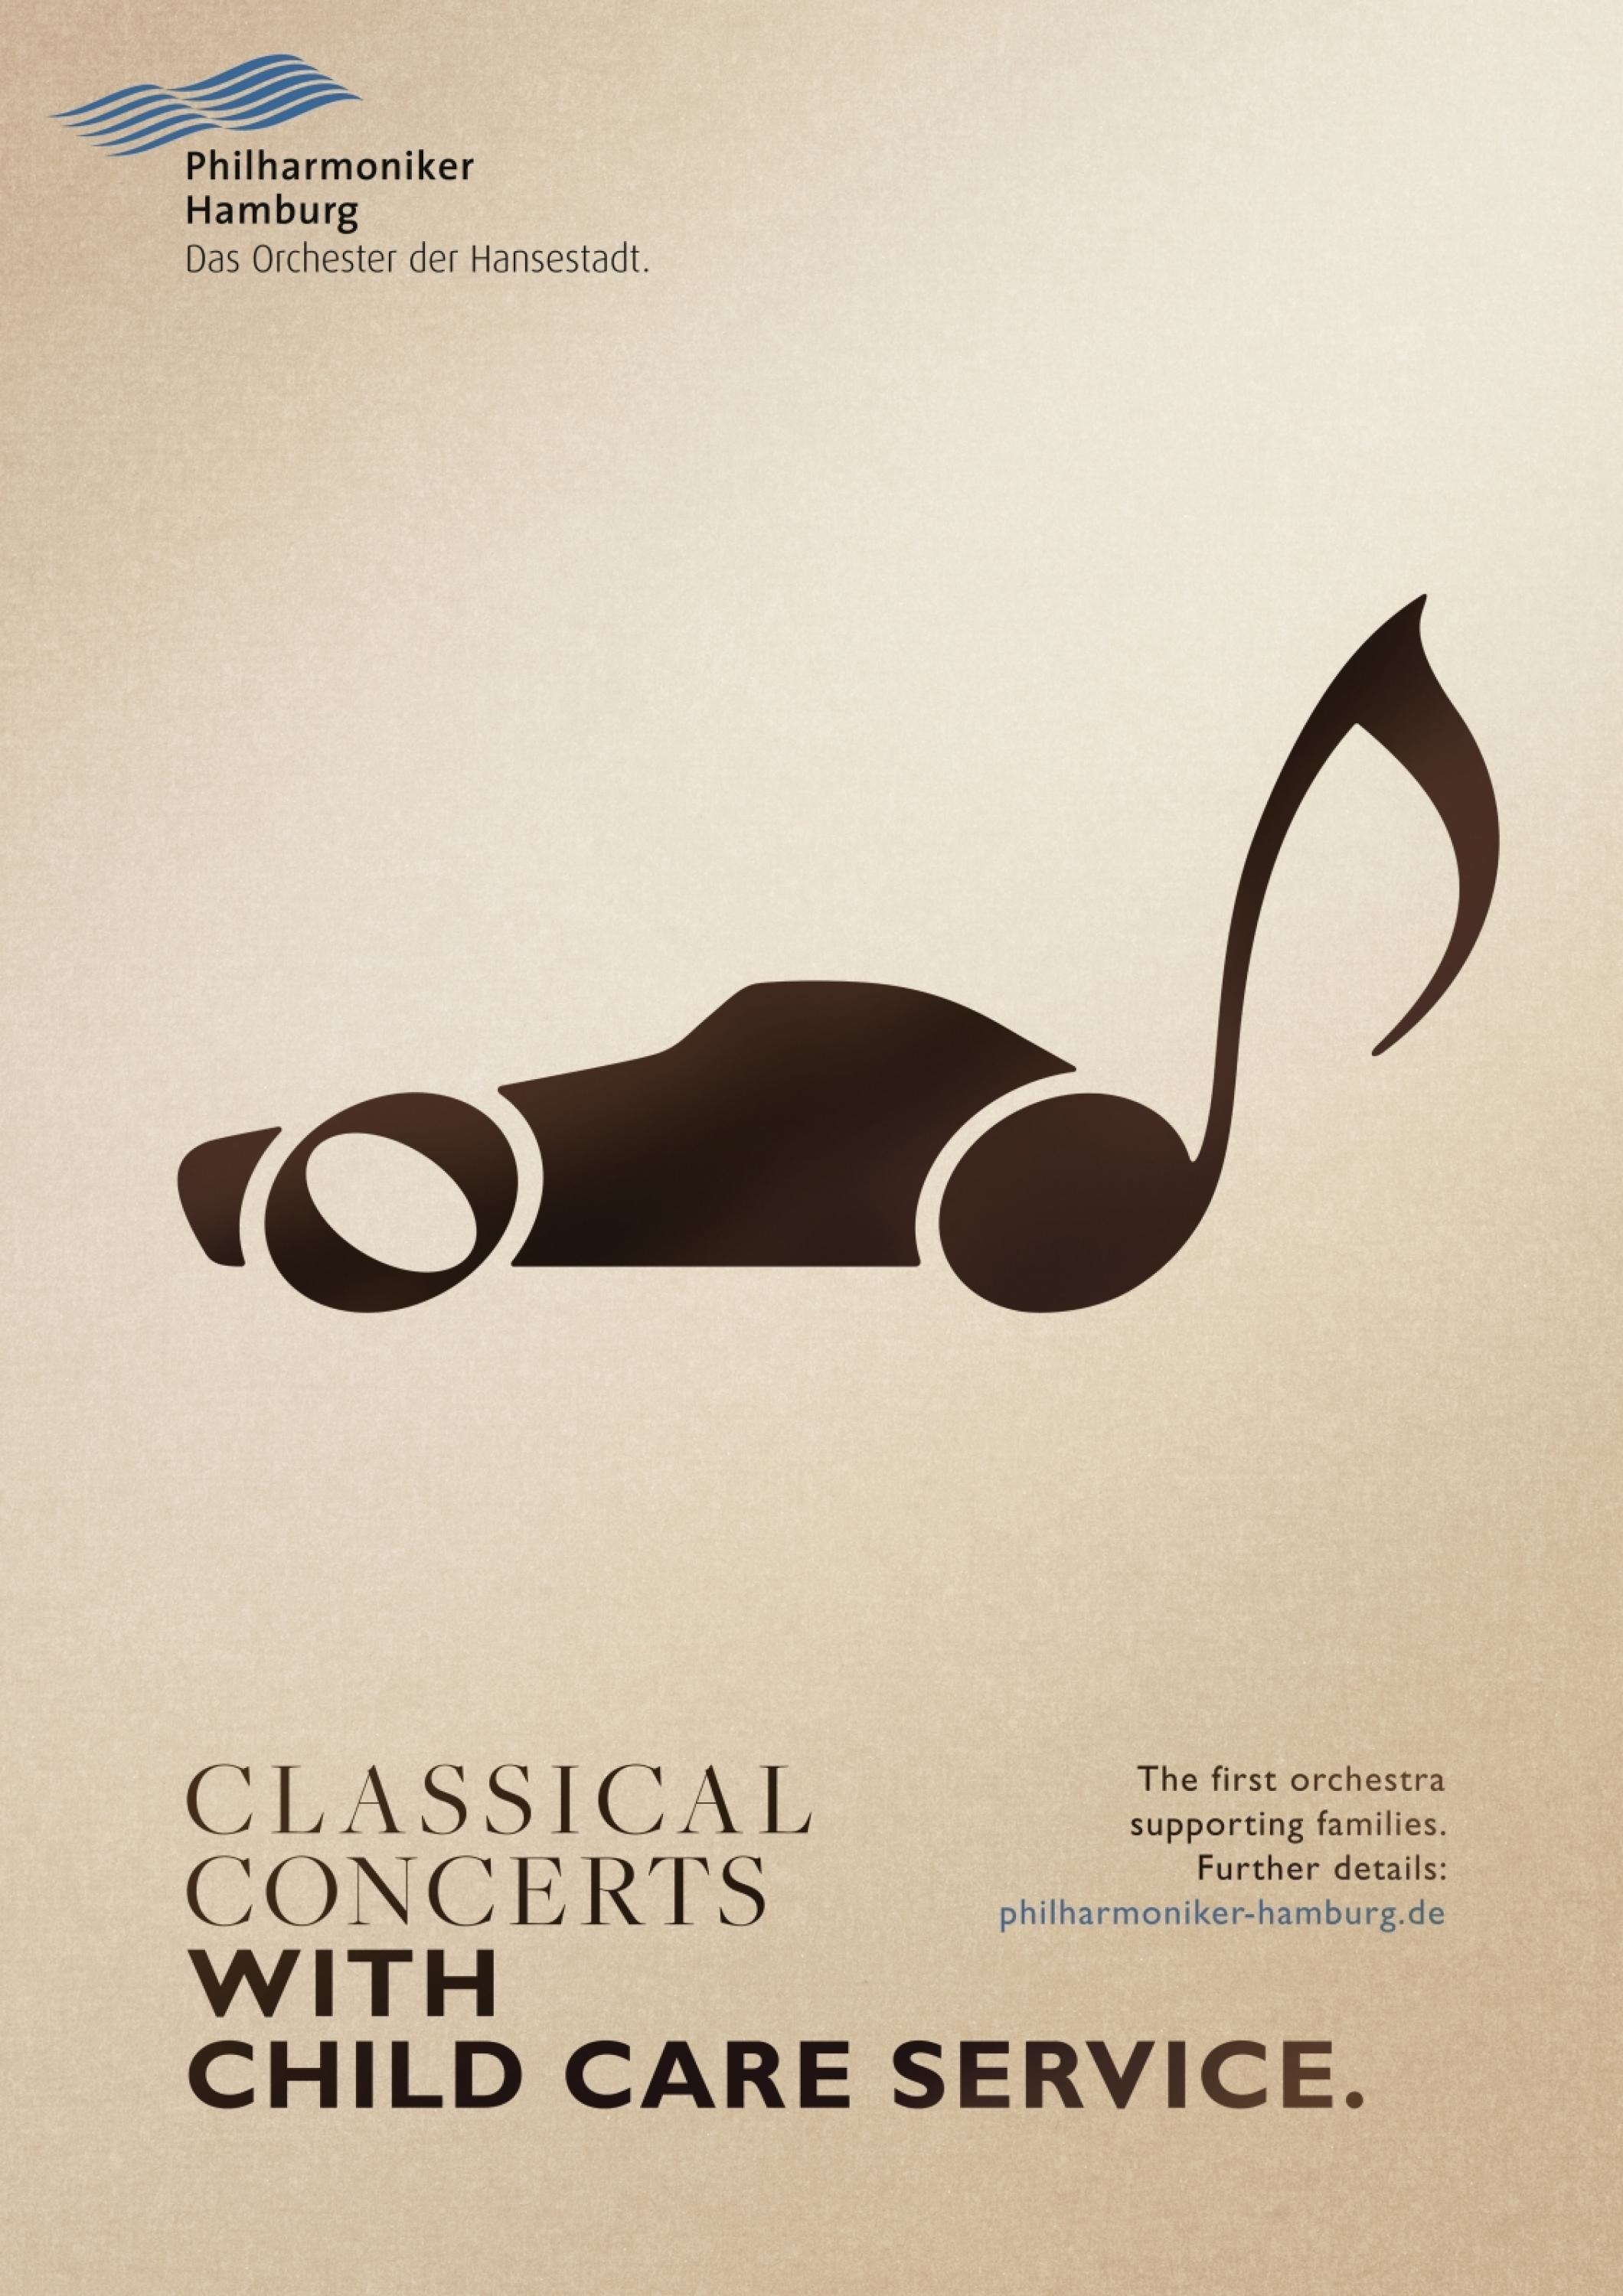 CLASSICAL CONCERTS WITH CHILD CARE